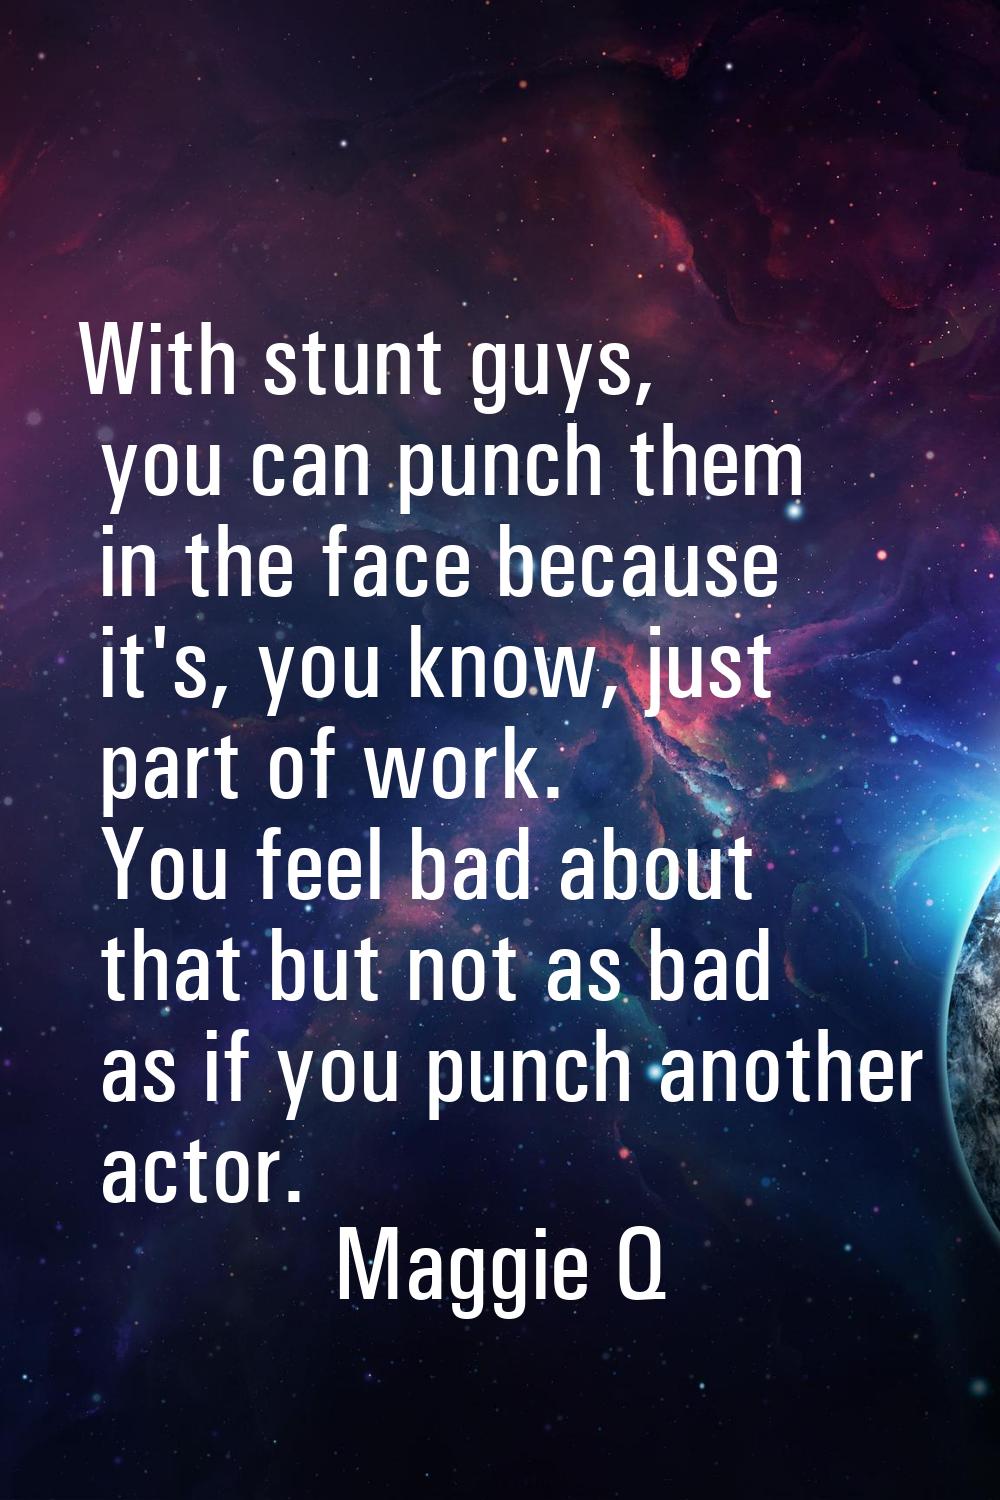 With stunt guys, you can punch them in the face because it's, you know, just part of work. You feel